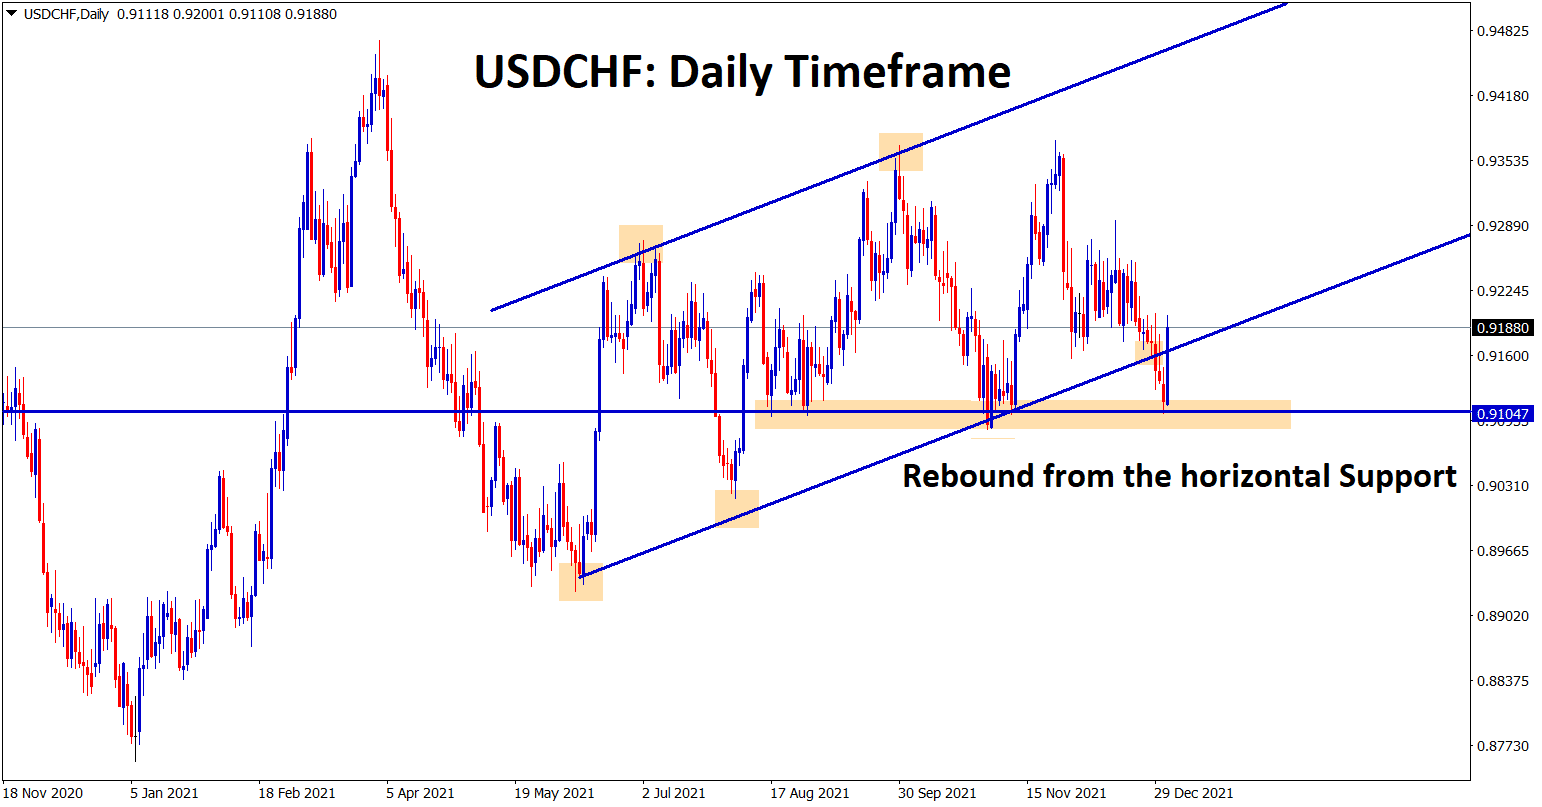 USDCHF has rebounded from the strong support